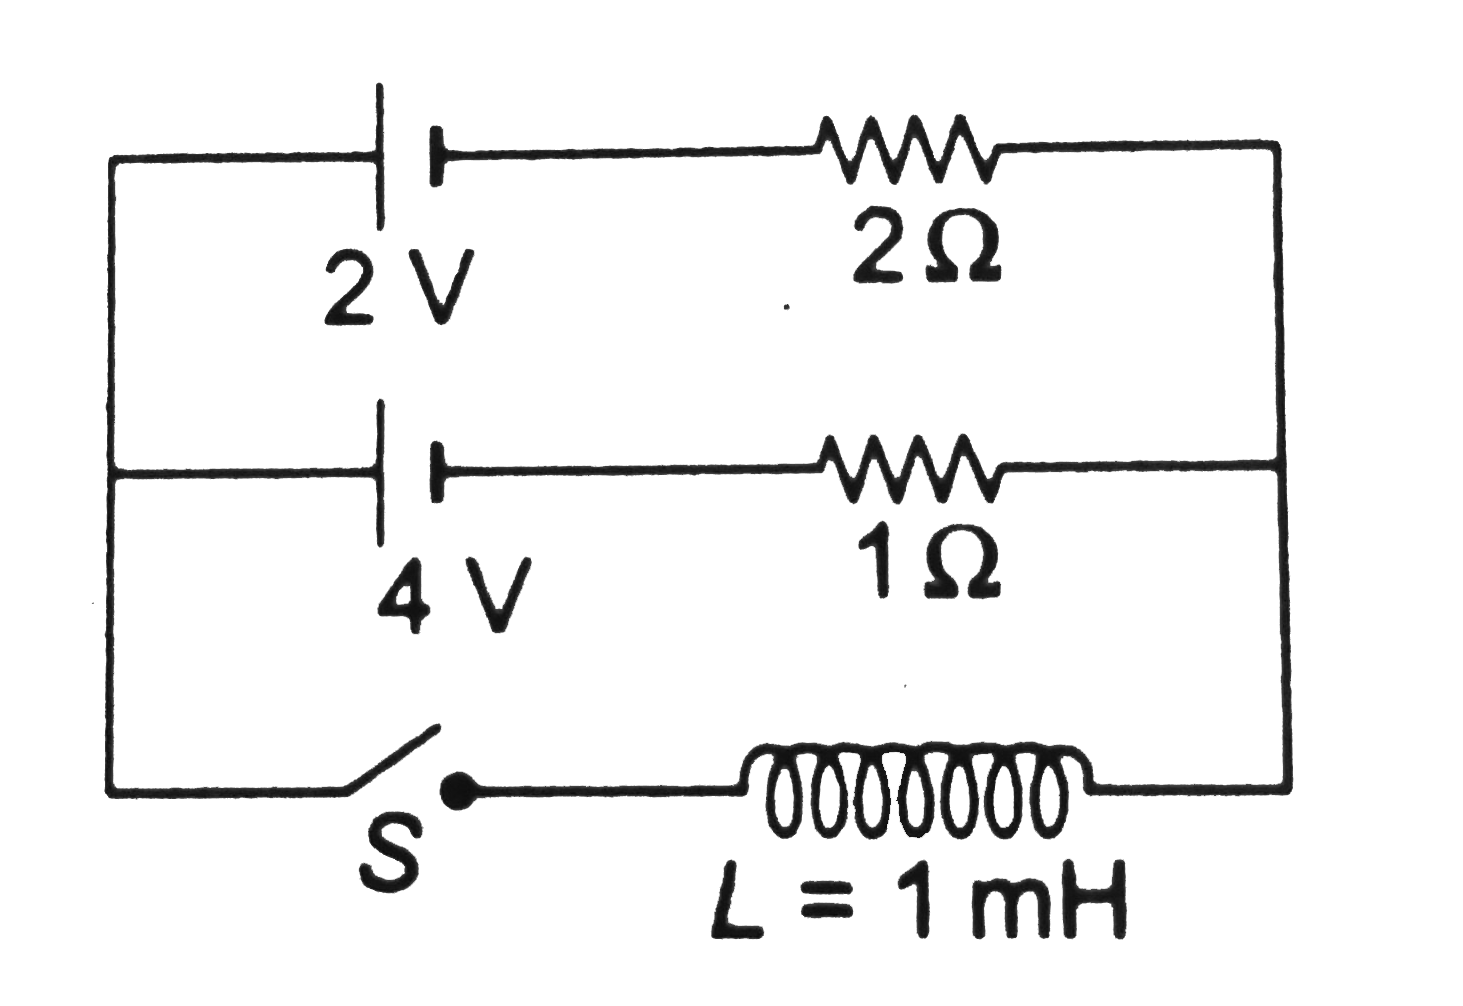 In the circuit shown, switch S is closed at time t = 0. Find the current through the inductor as a function of time t.